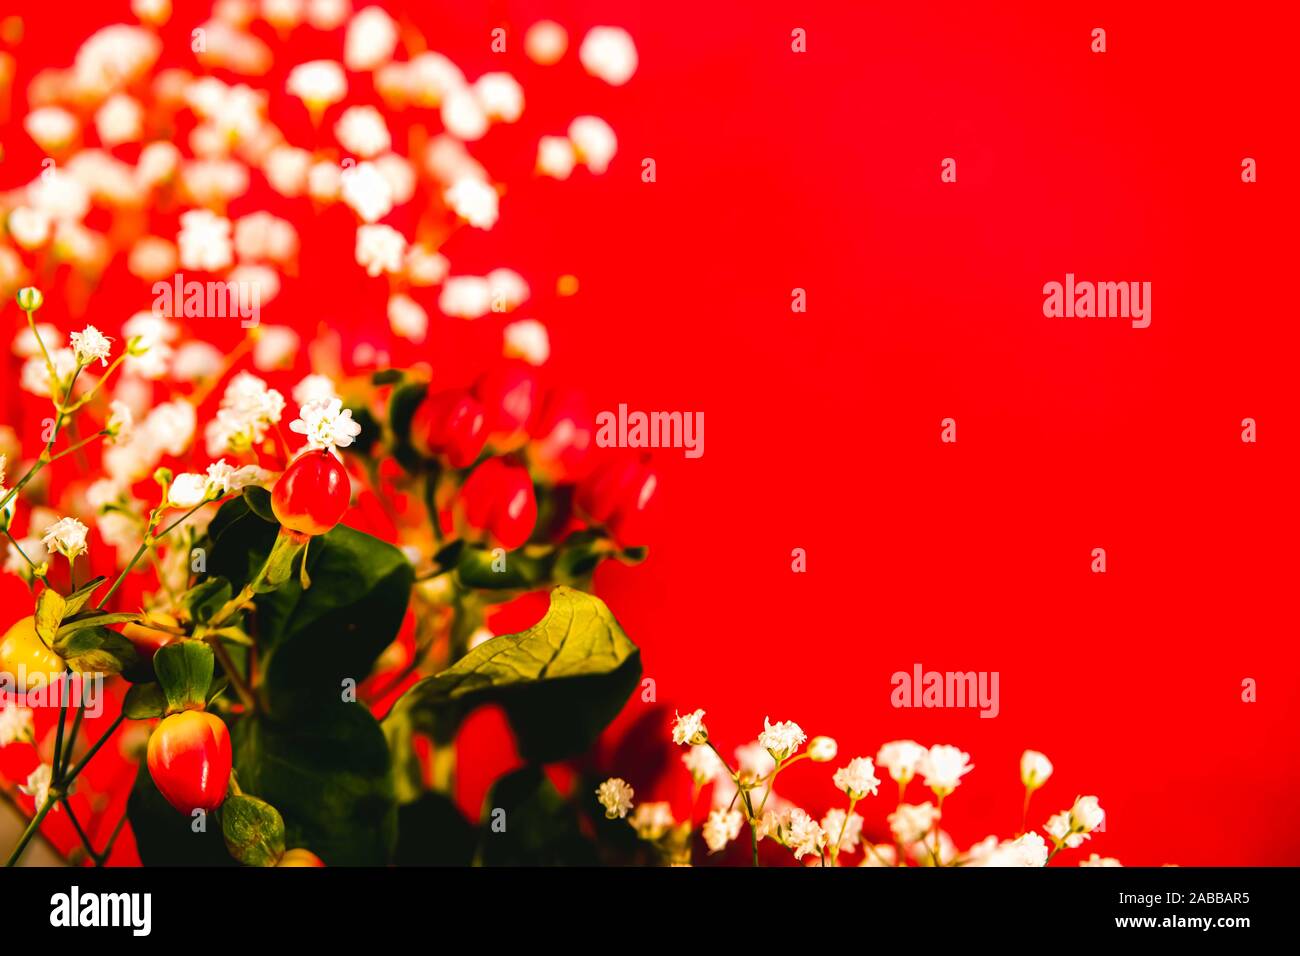 Bouquet of flowers for wedding or Valentine's day greeting card. Red berries and gypsophilas or Baby's-Breath on red background, selective focuse. Stock Photo